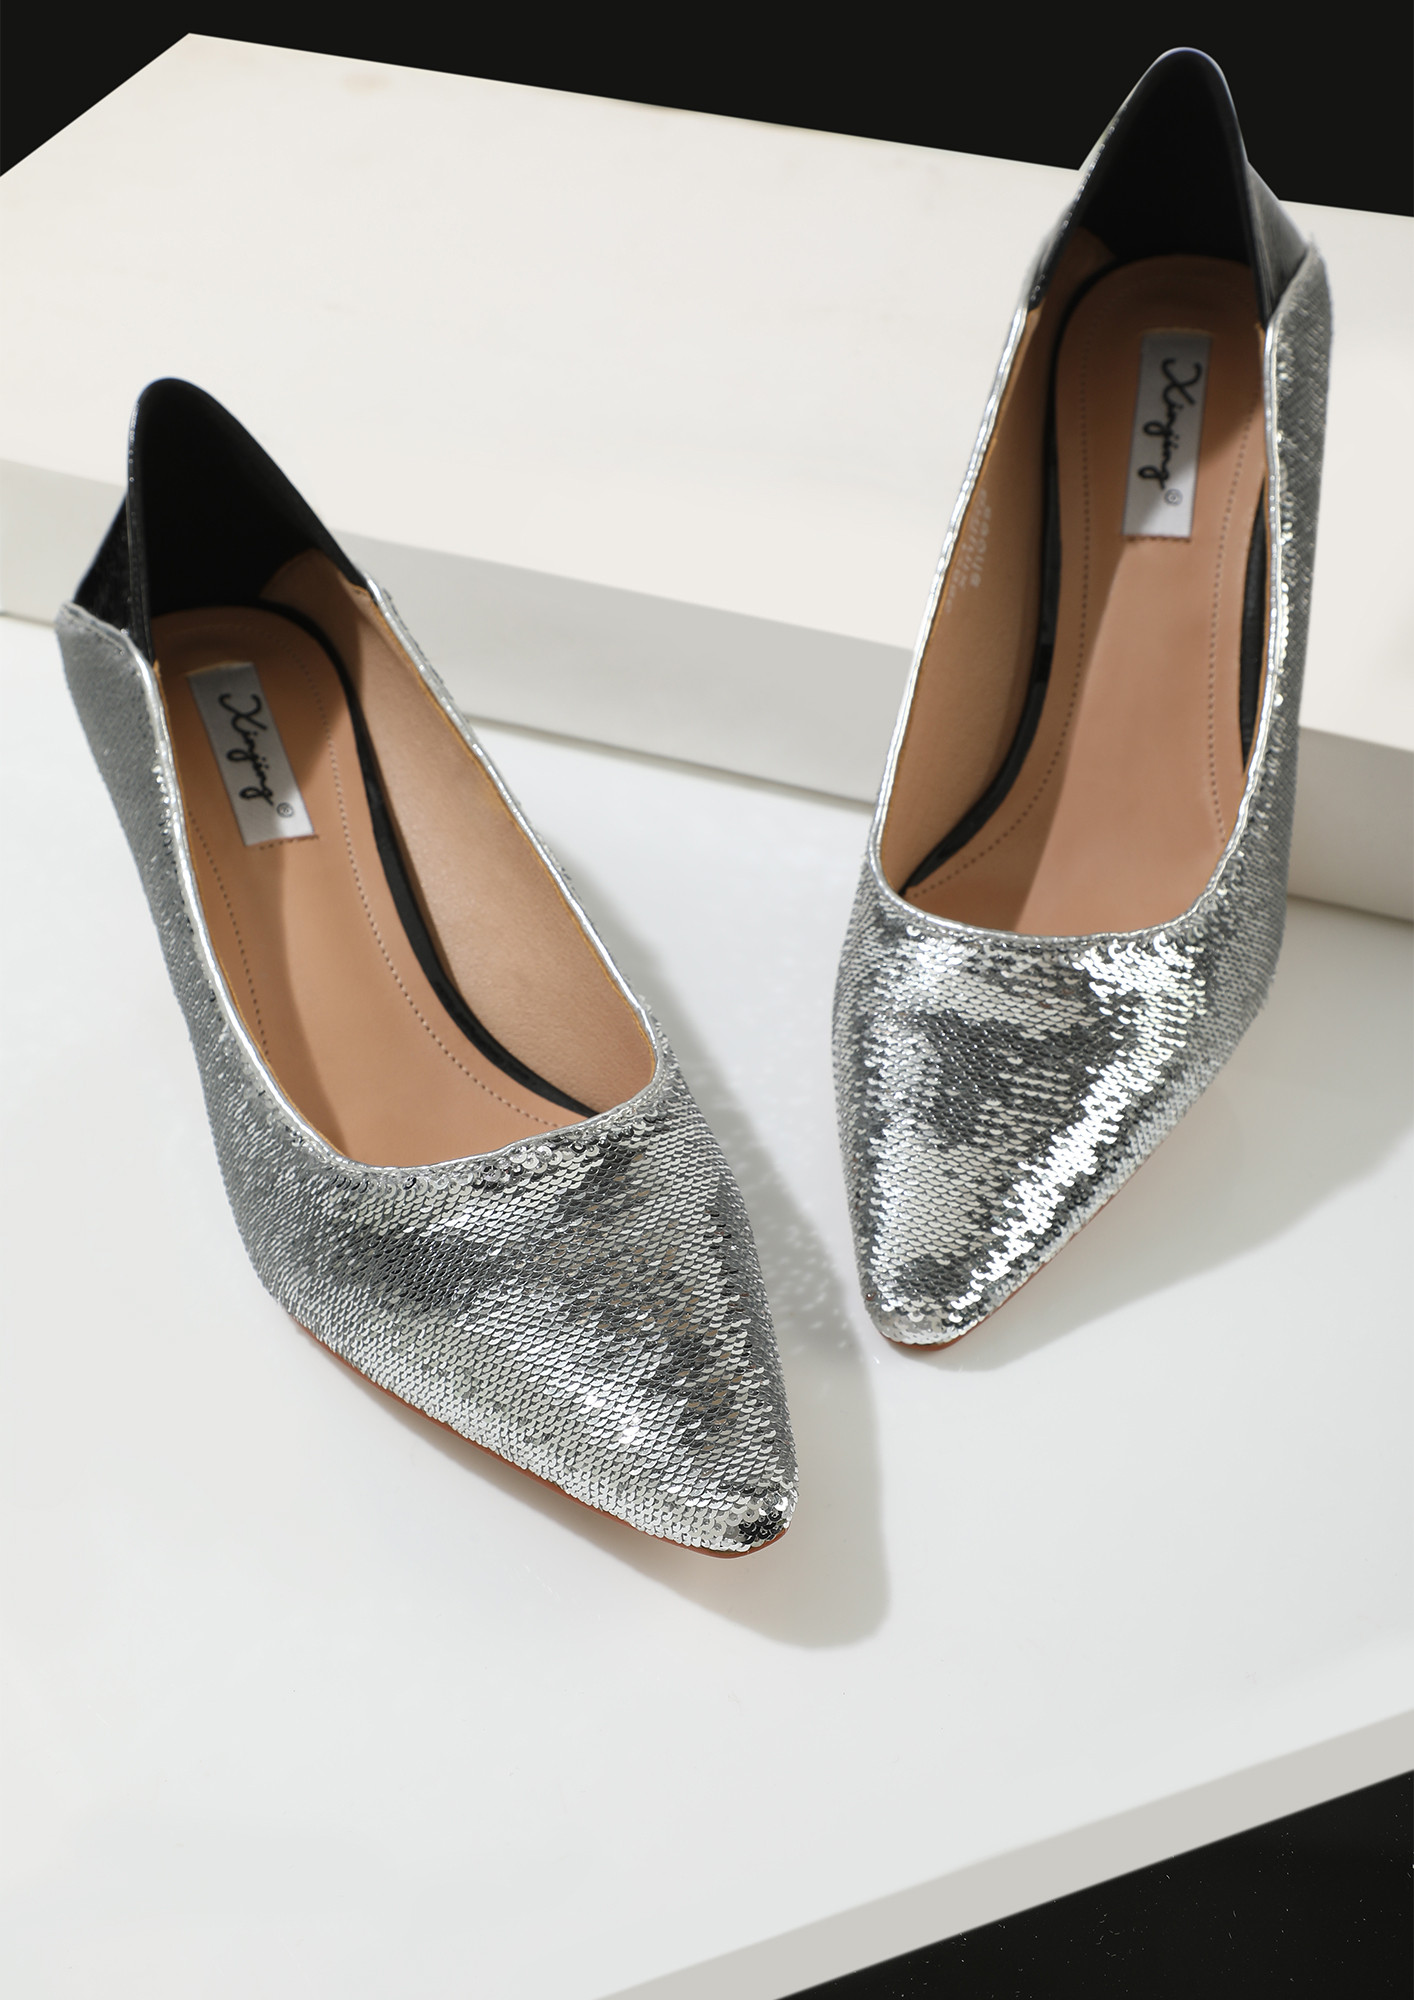 THE PARTY CRASHER SILVER PUMPS